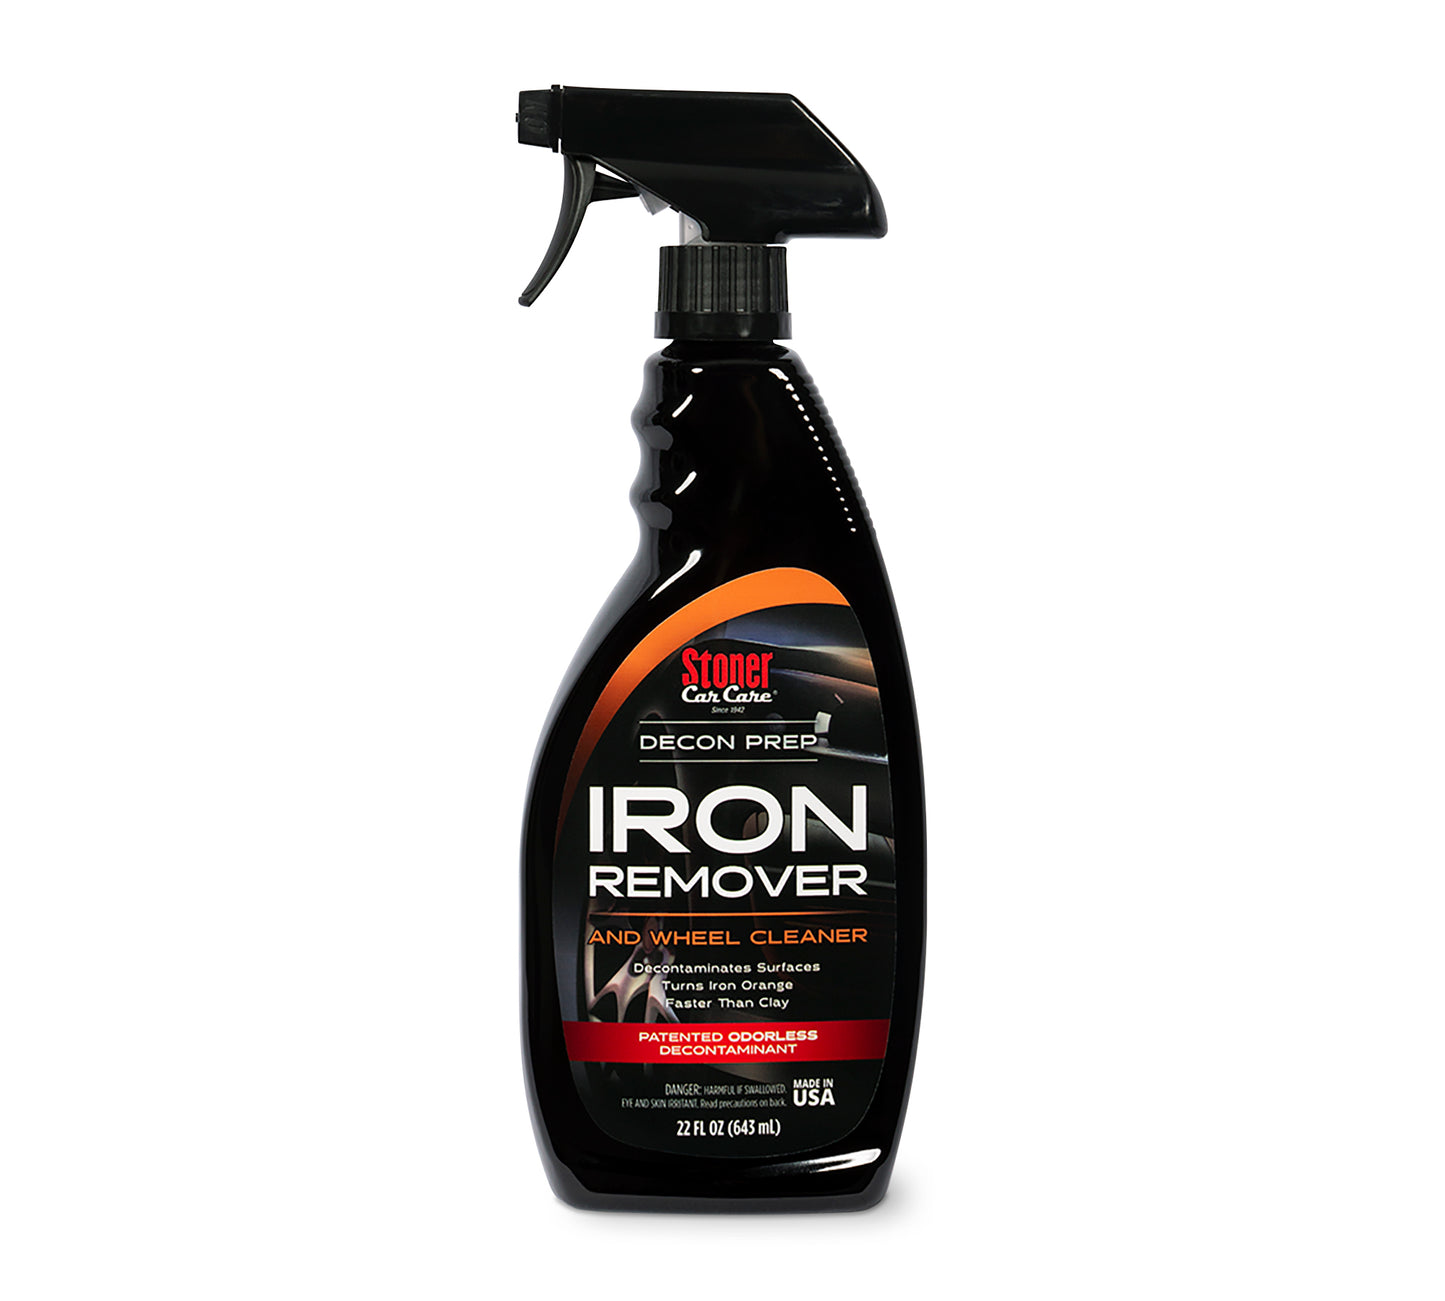 Stoner Car Care Iron Remover and Wheel Cleaner